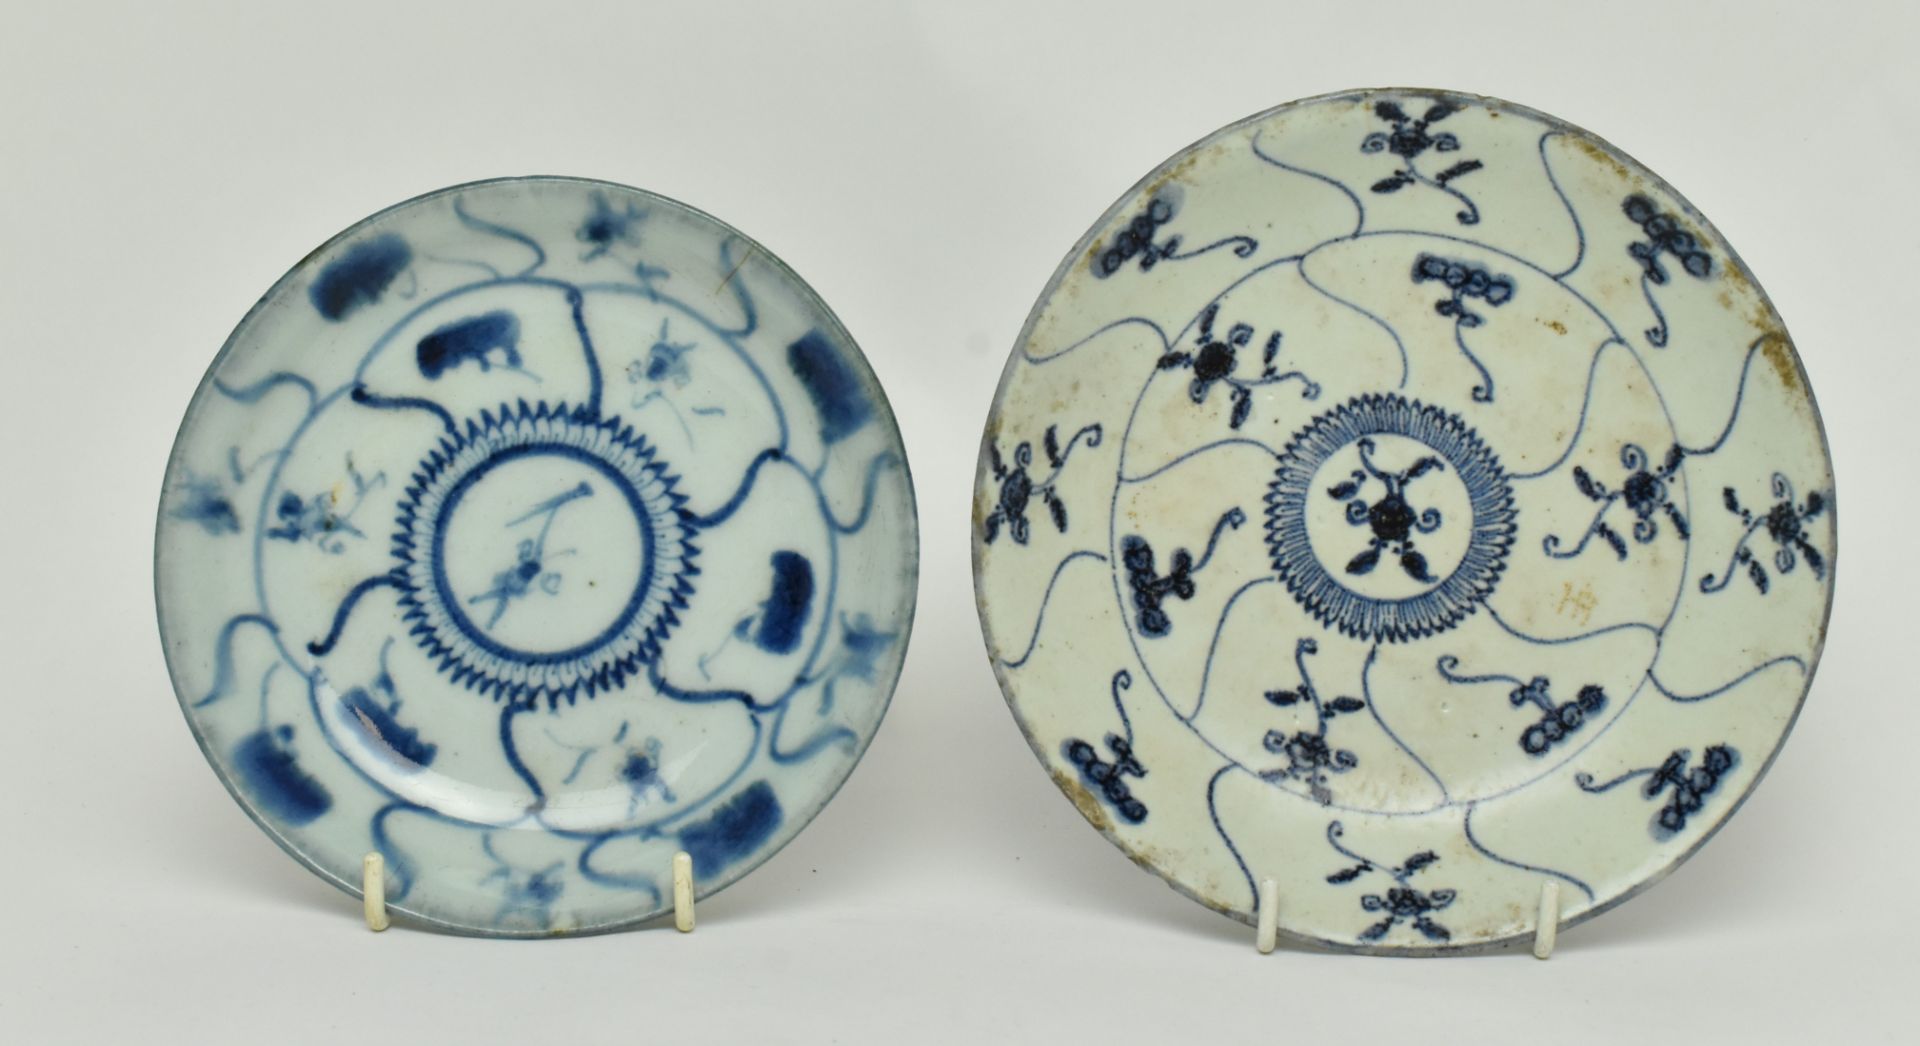 GROUP OF SIX BLUE AND WHITE EXPORT PLATES, QING DYNASTY - Image 6 of 7